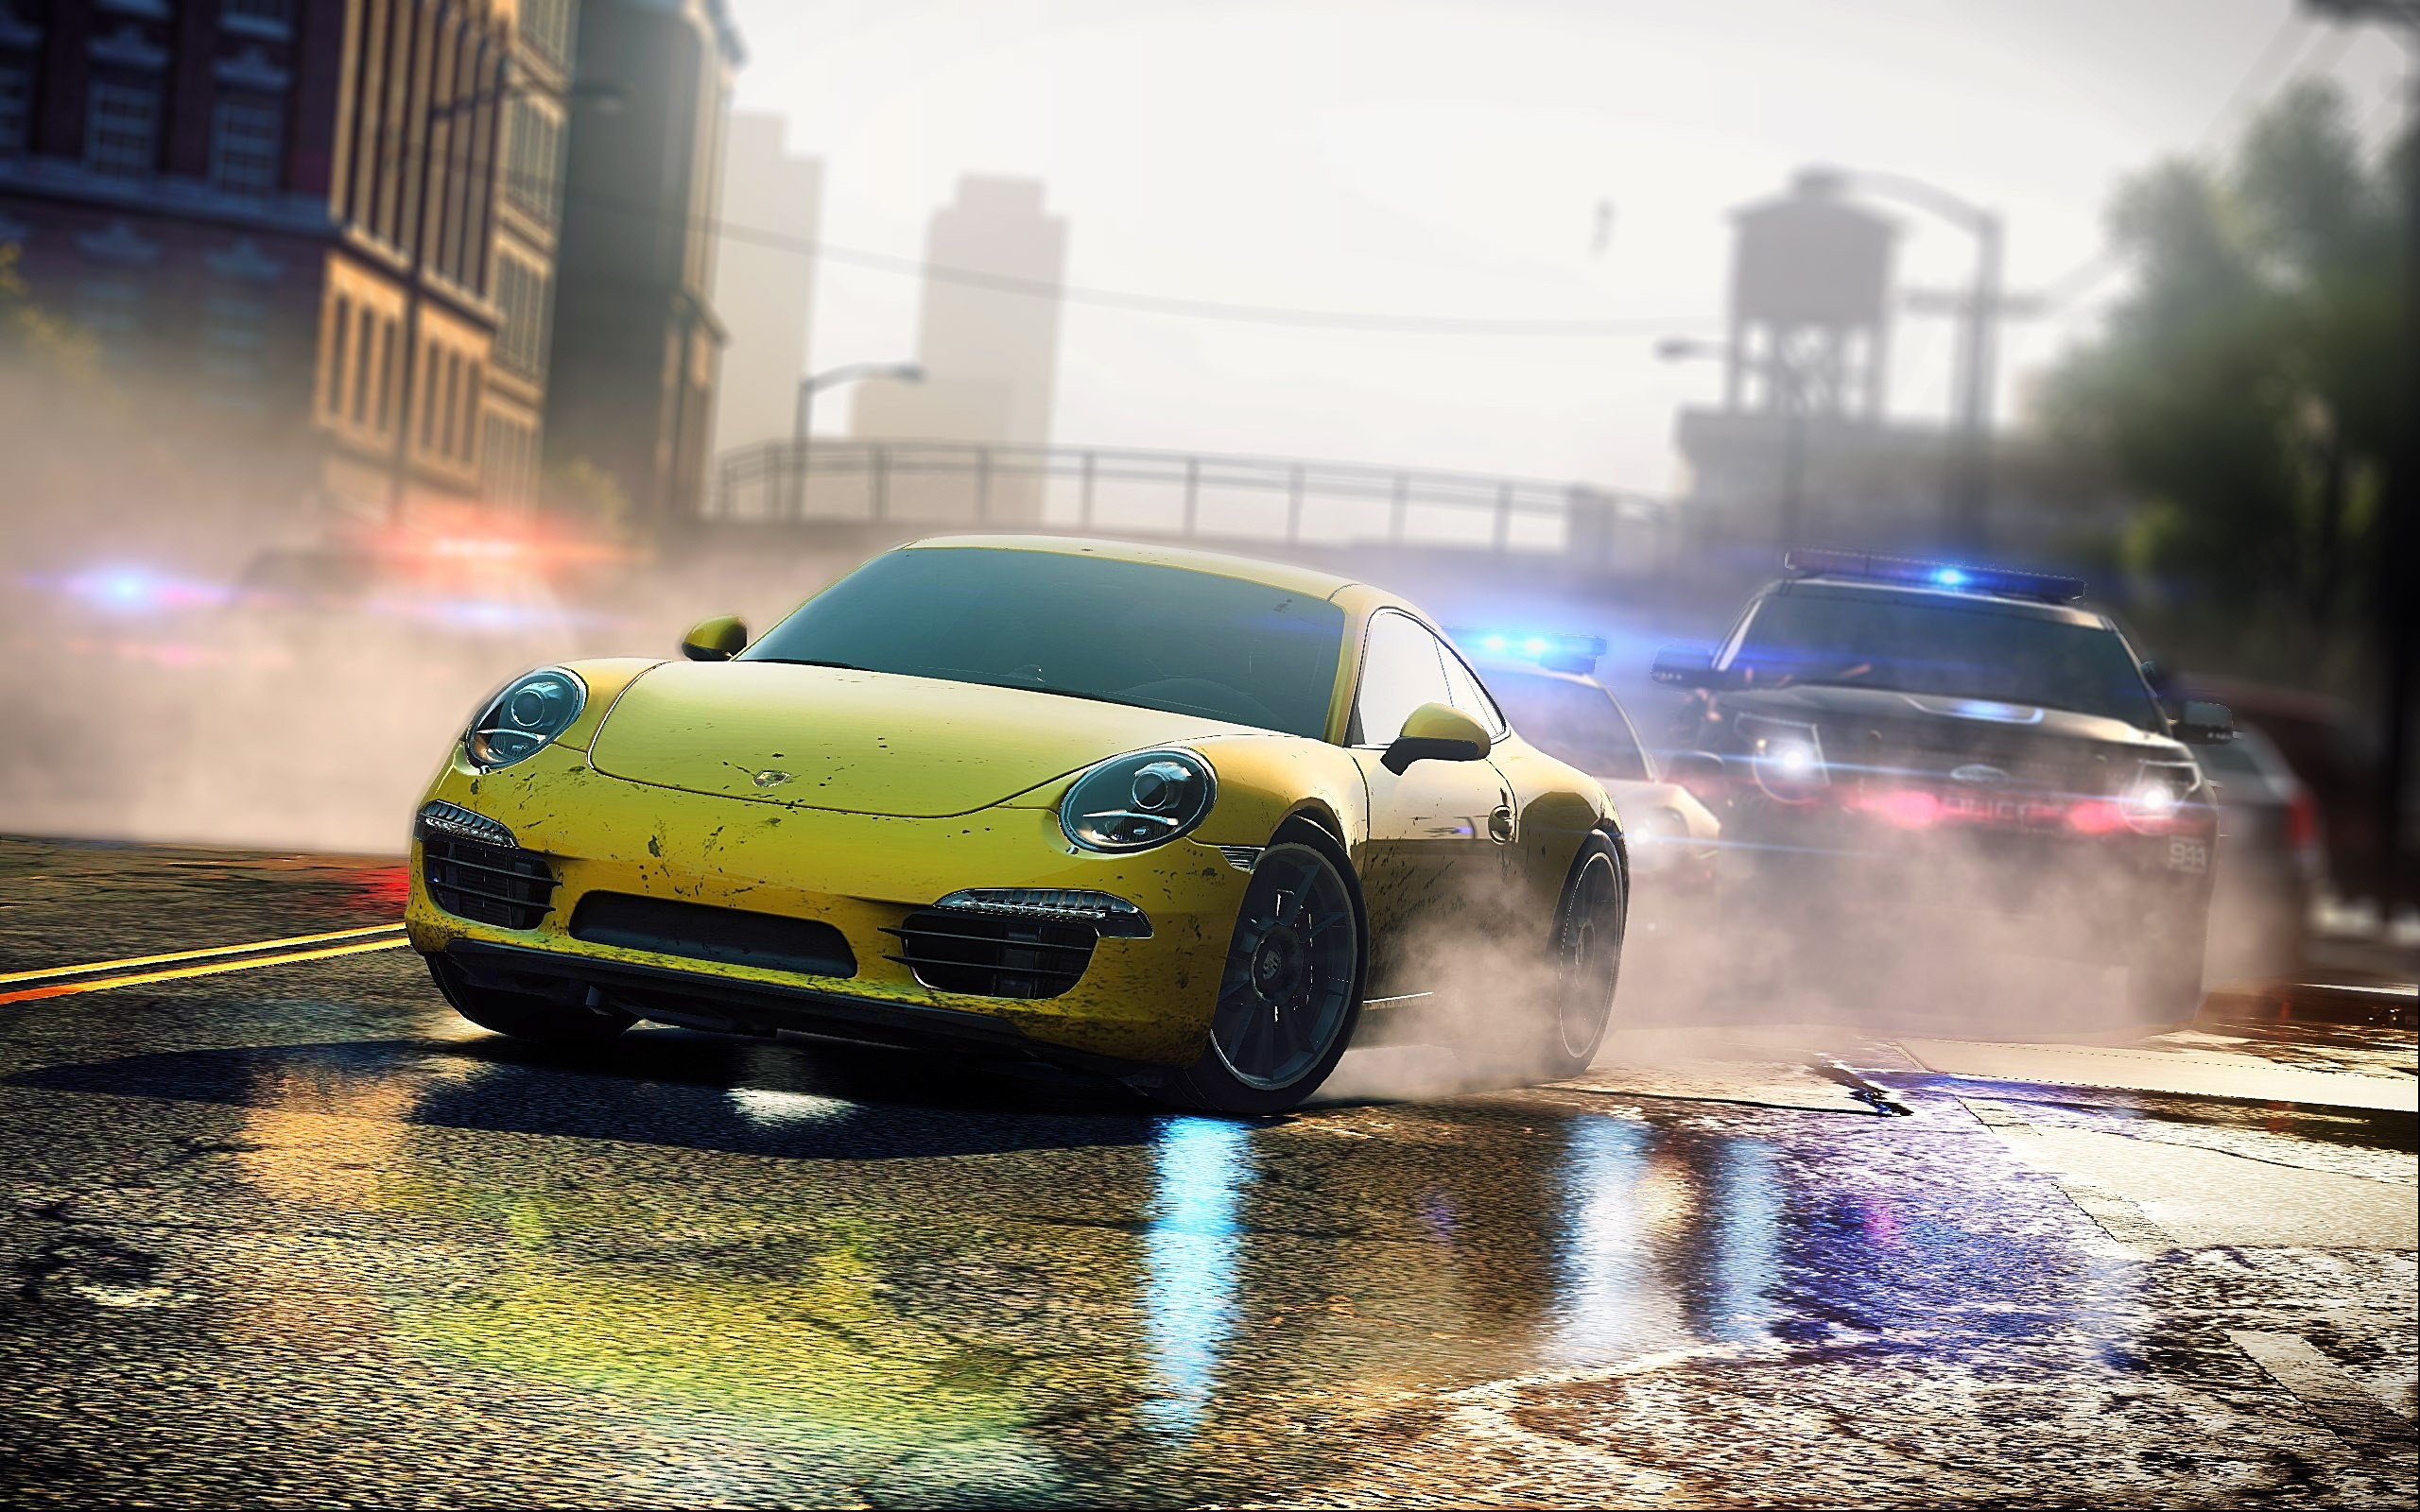 Need For Speed: Most Wanted (2012 Video Game), Porsche 911 Carrera S, Porsche, Video Games, Porsche 911 Wallpaper